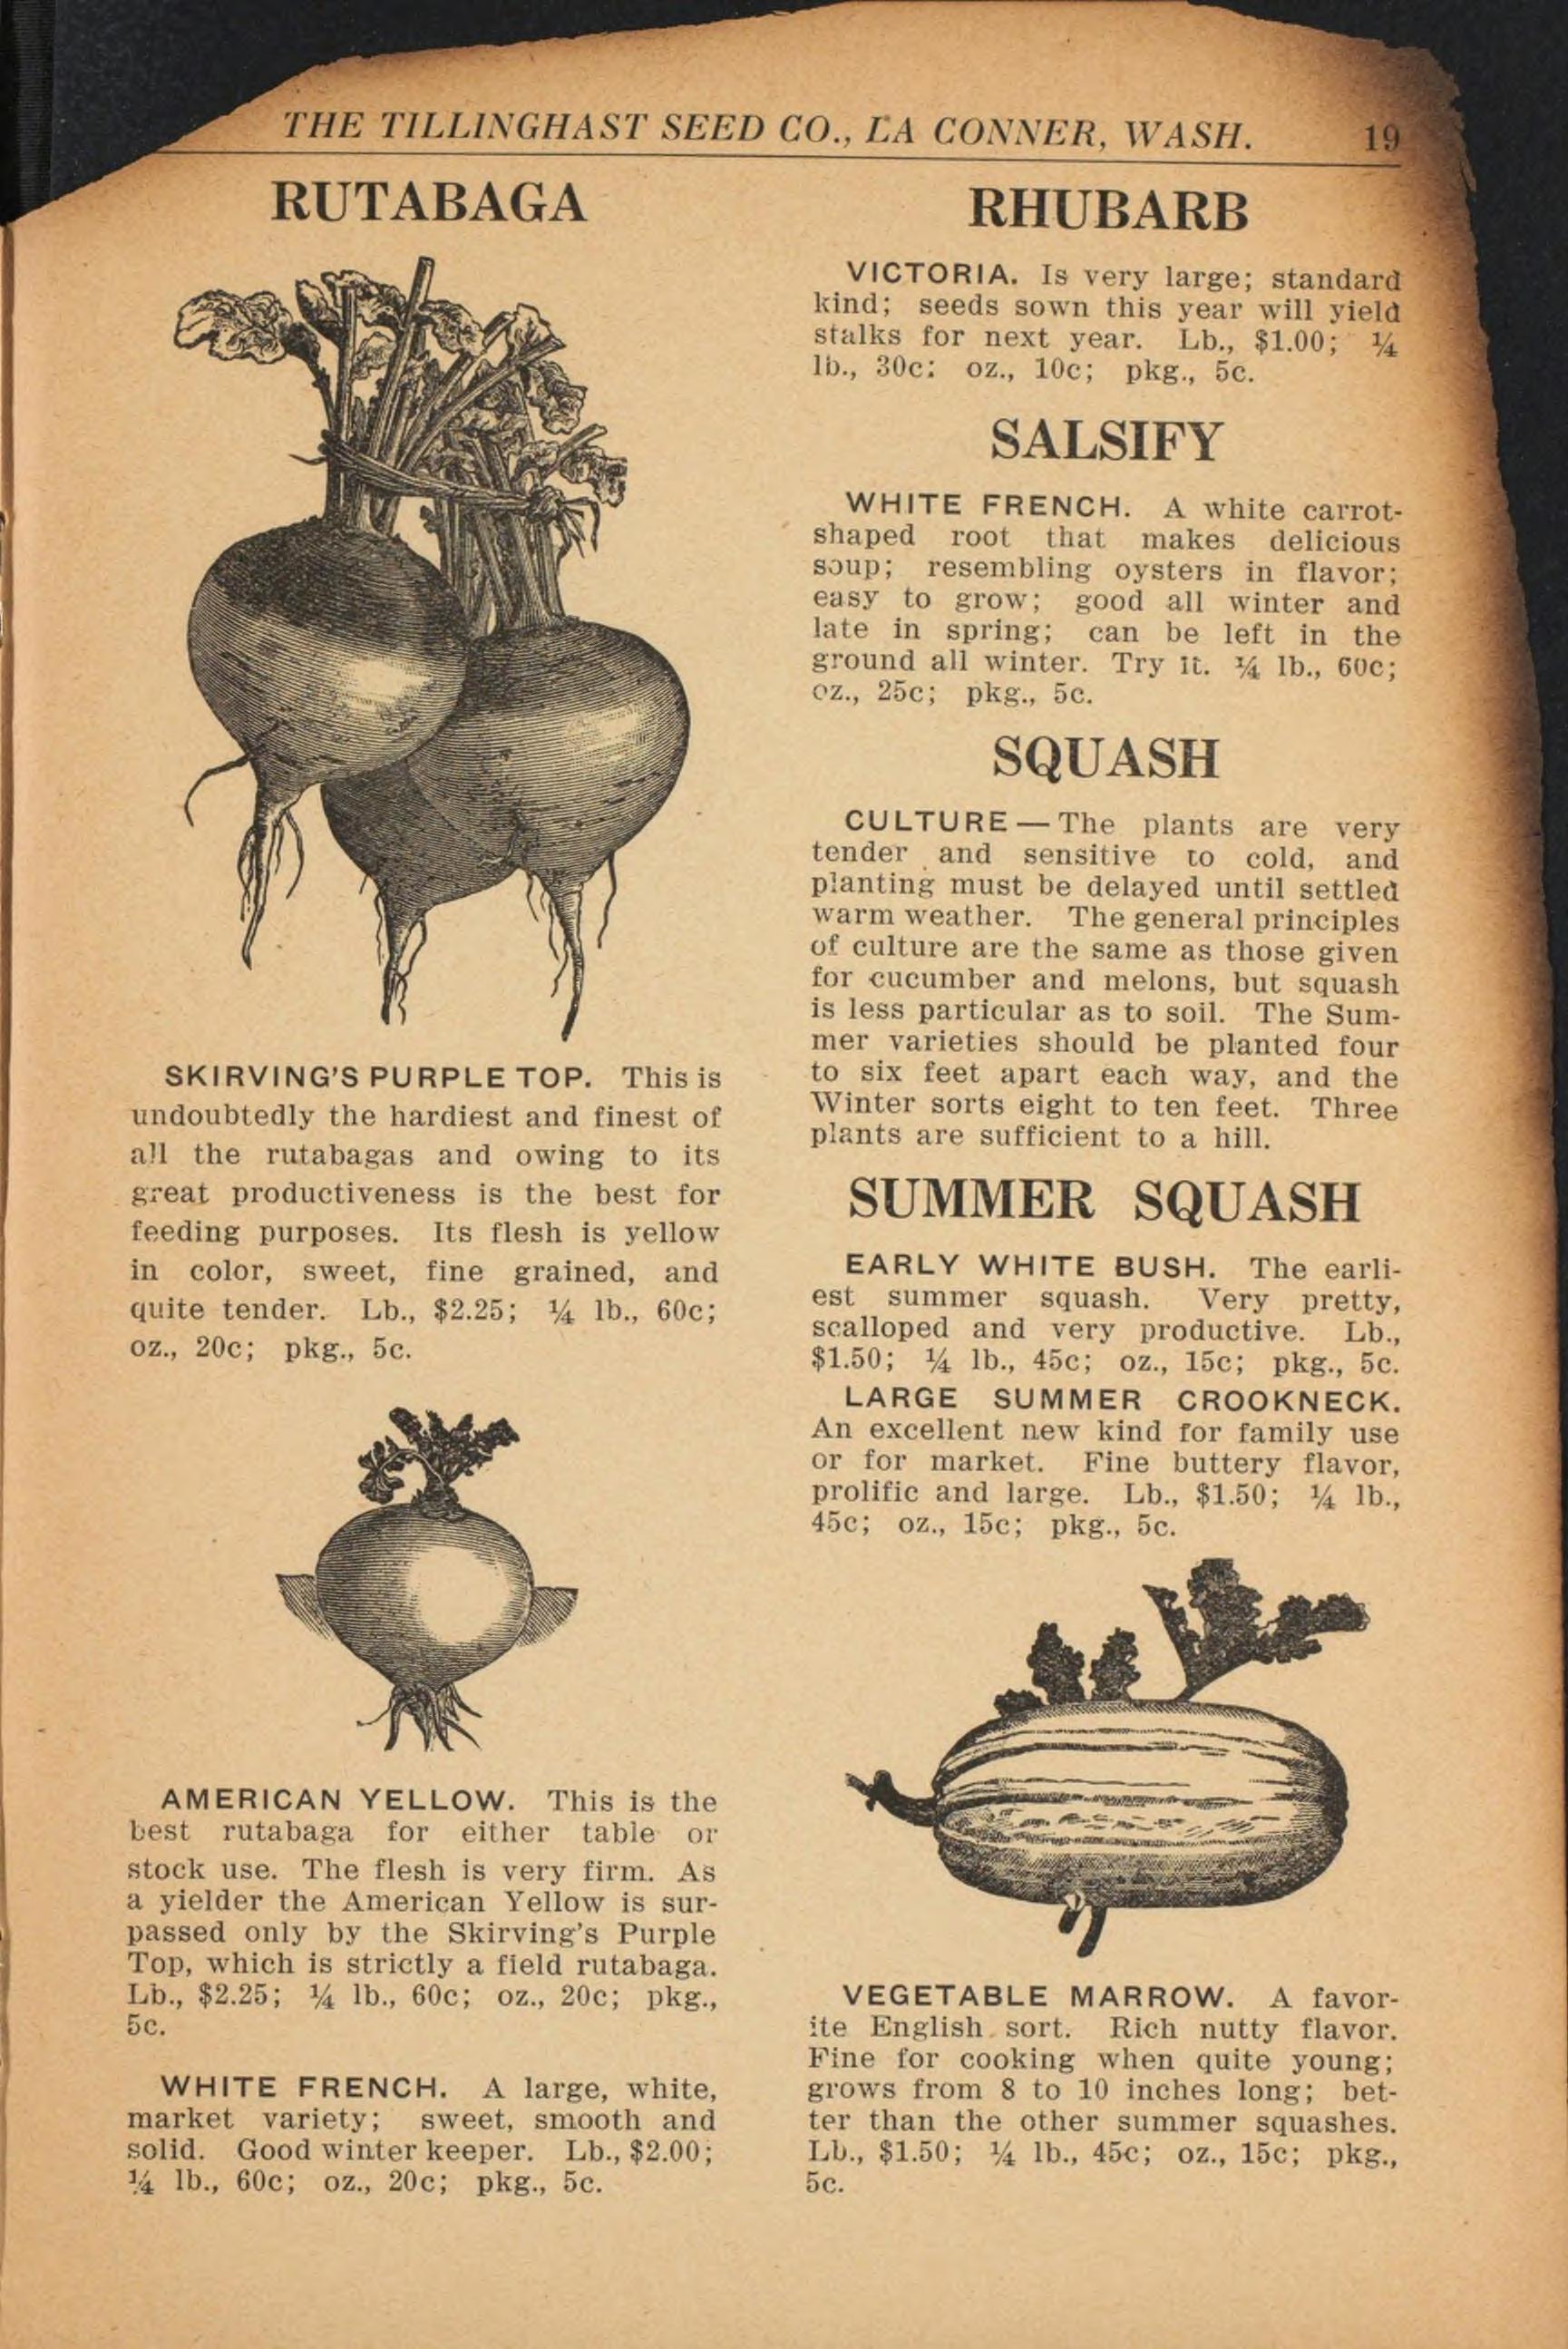 https://upload.wikimedia.org/wikipedia/commons/f/f2/Tillinghast_Seed_Co._materials_%28Page_19%29_BHL48171084.jpg